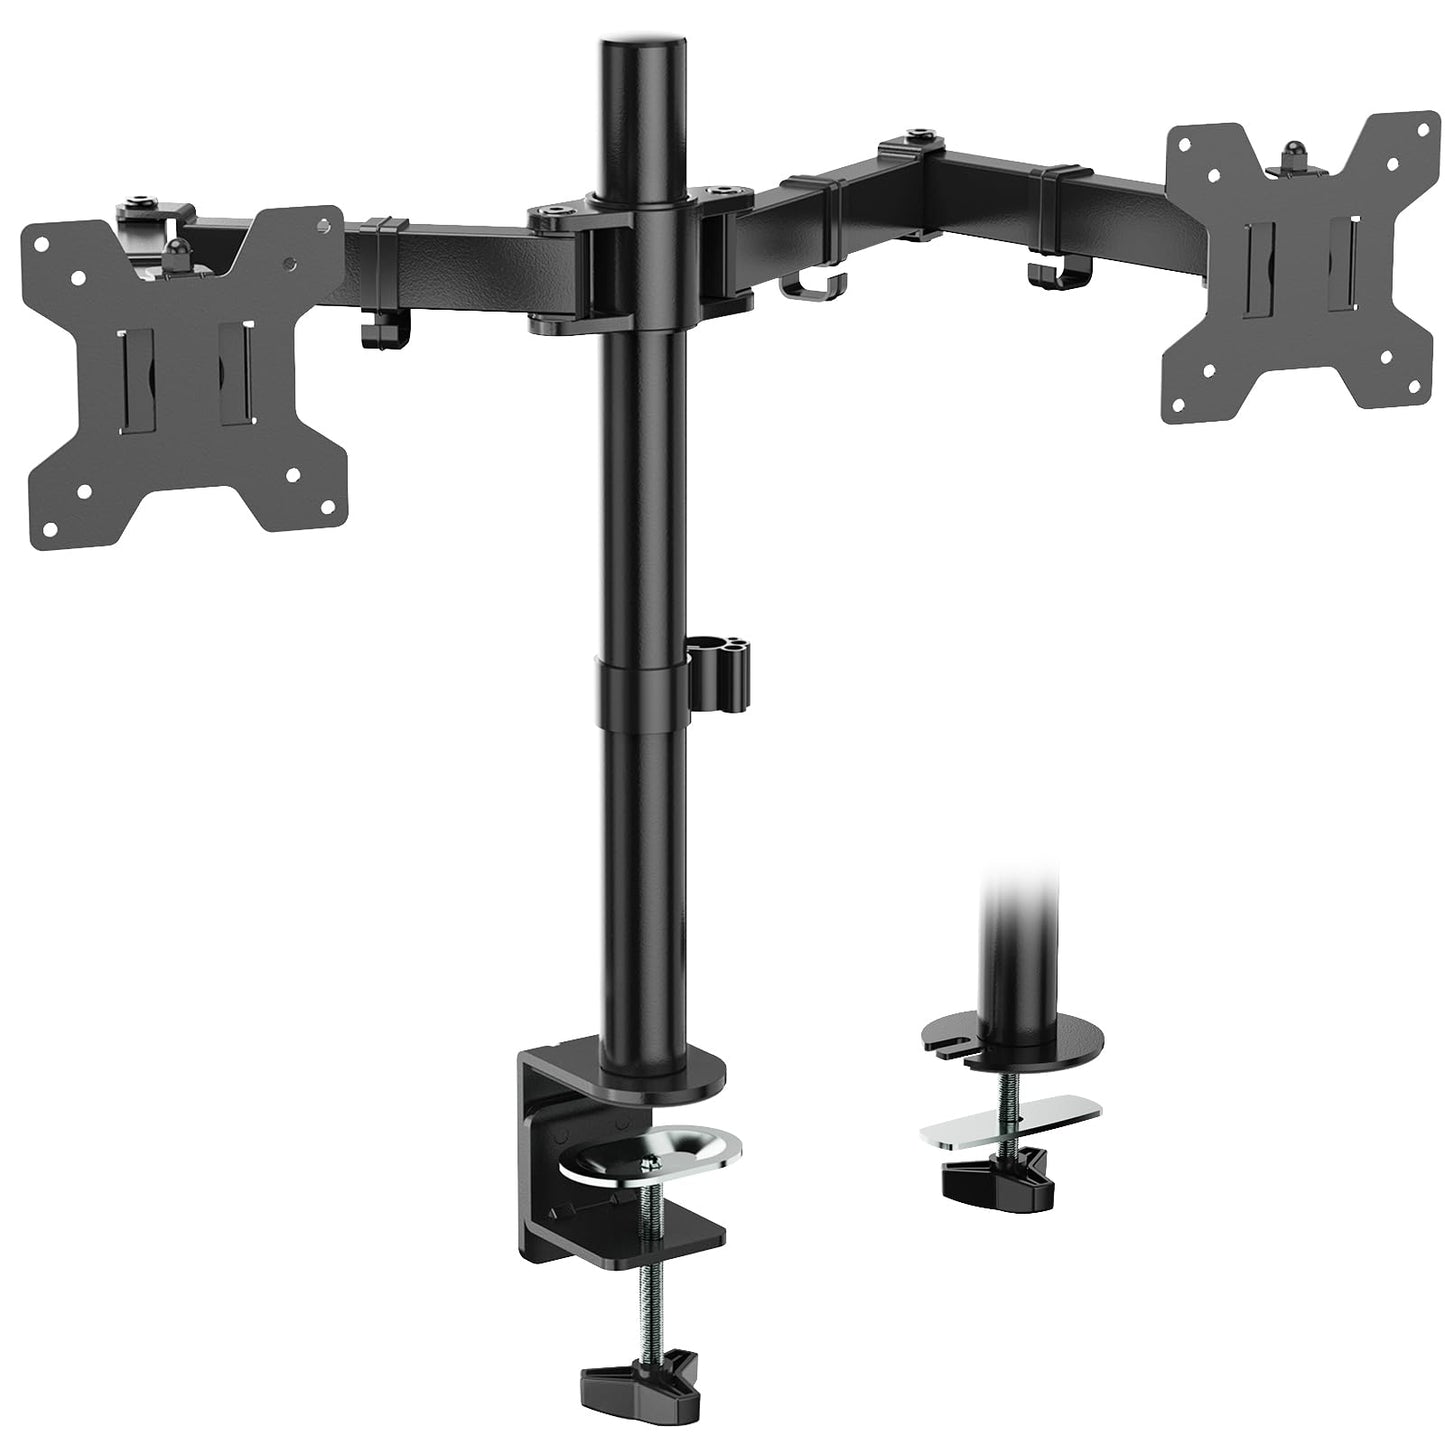 WALI Dual Monitor Desk Mount, Monitor Stand for 2 Monitors Up to 27inch, Dual Monitor Mount Max 22lbs for Home, Office, School (M002), Black